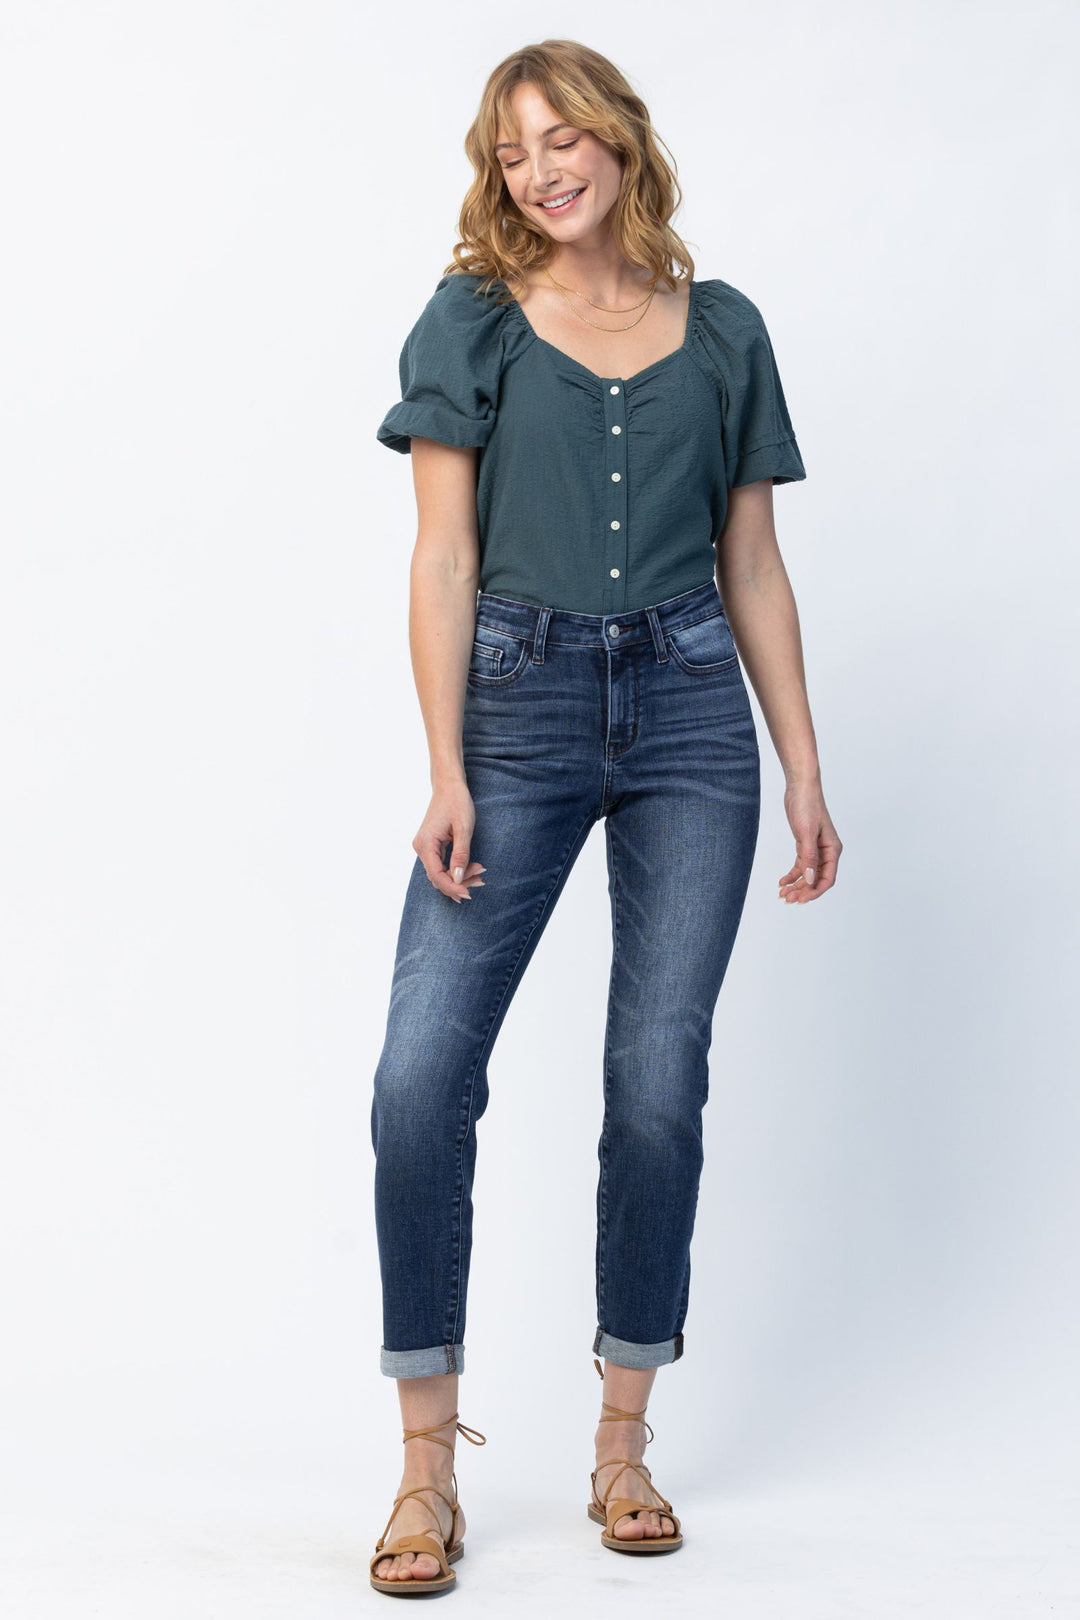 Jade Basic Cuffed Slim Fit Denim, Judy Blue-Denim-Inspired by Justeen-Women's Clothing Boutique in Chicago, Illinois